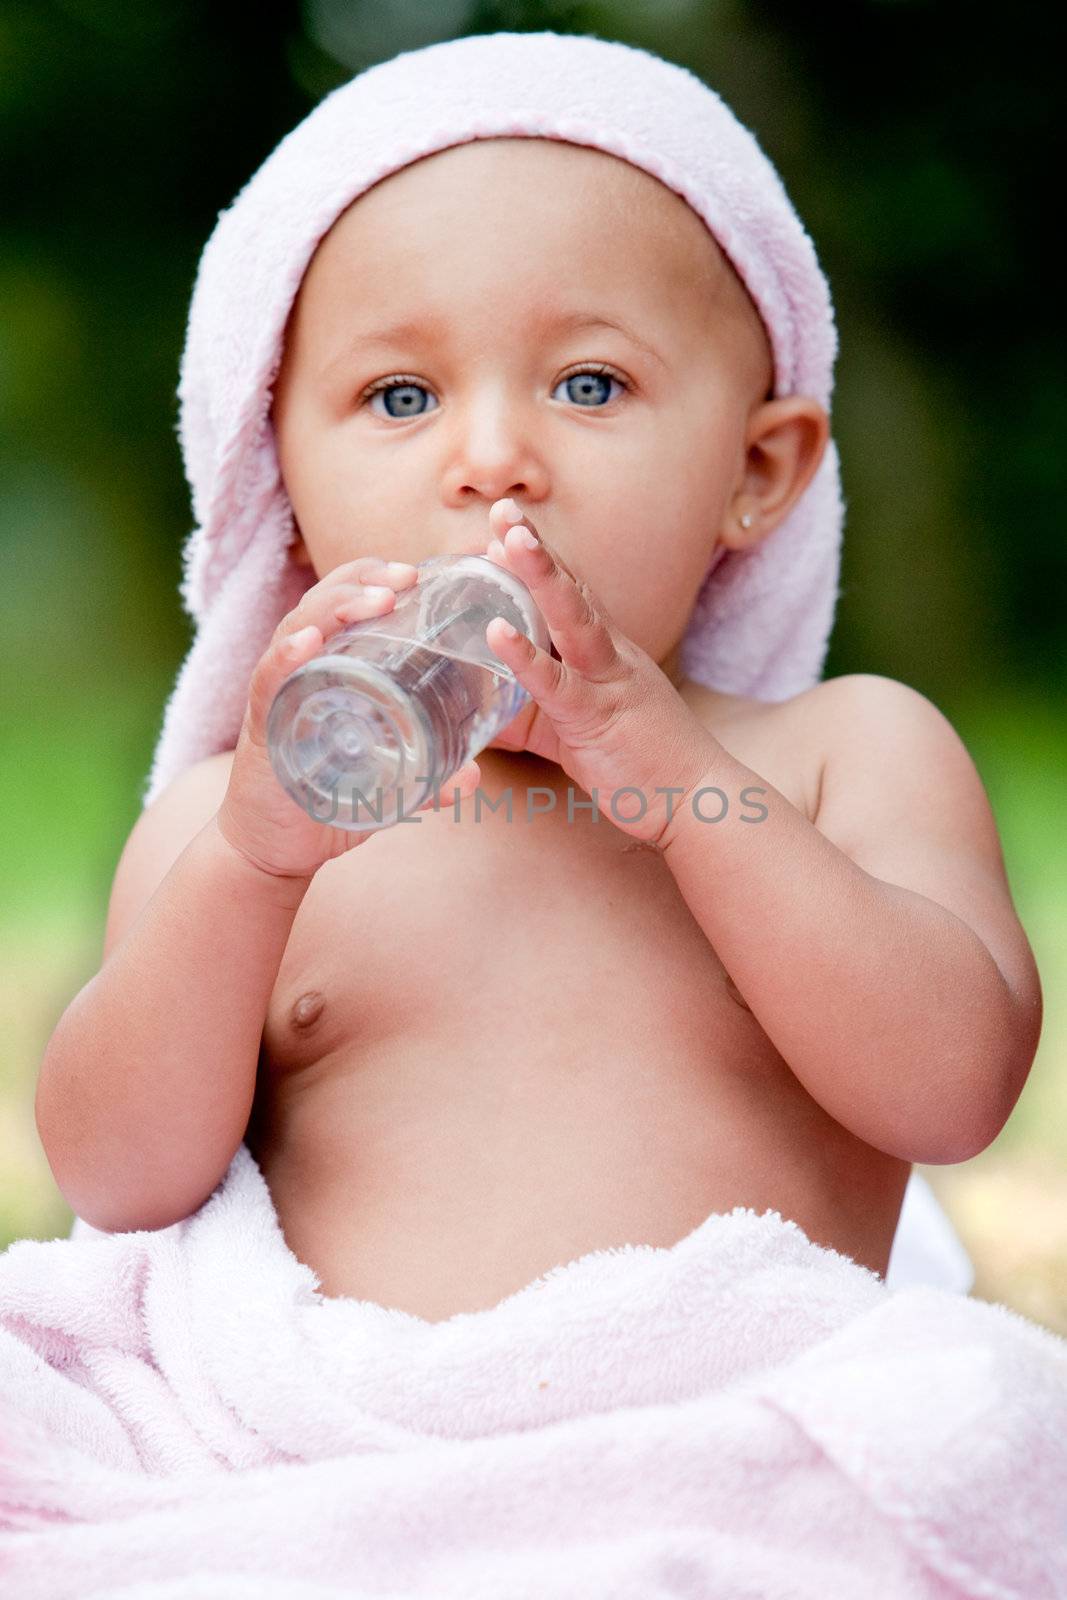 Baby and an oil bottle by DNFStyle